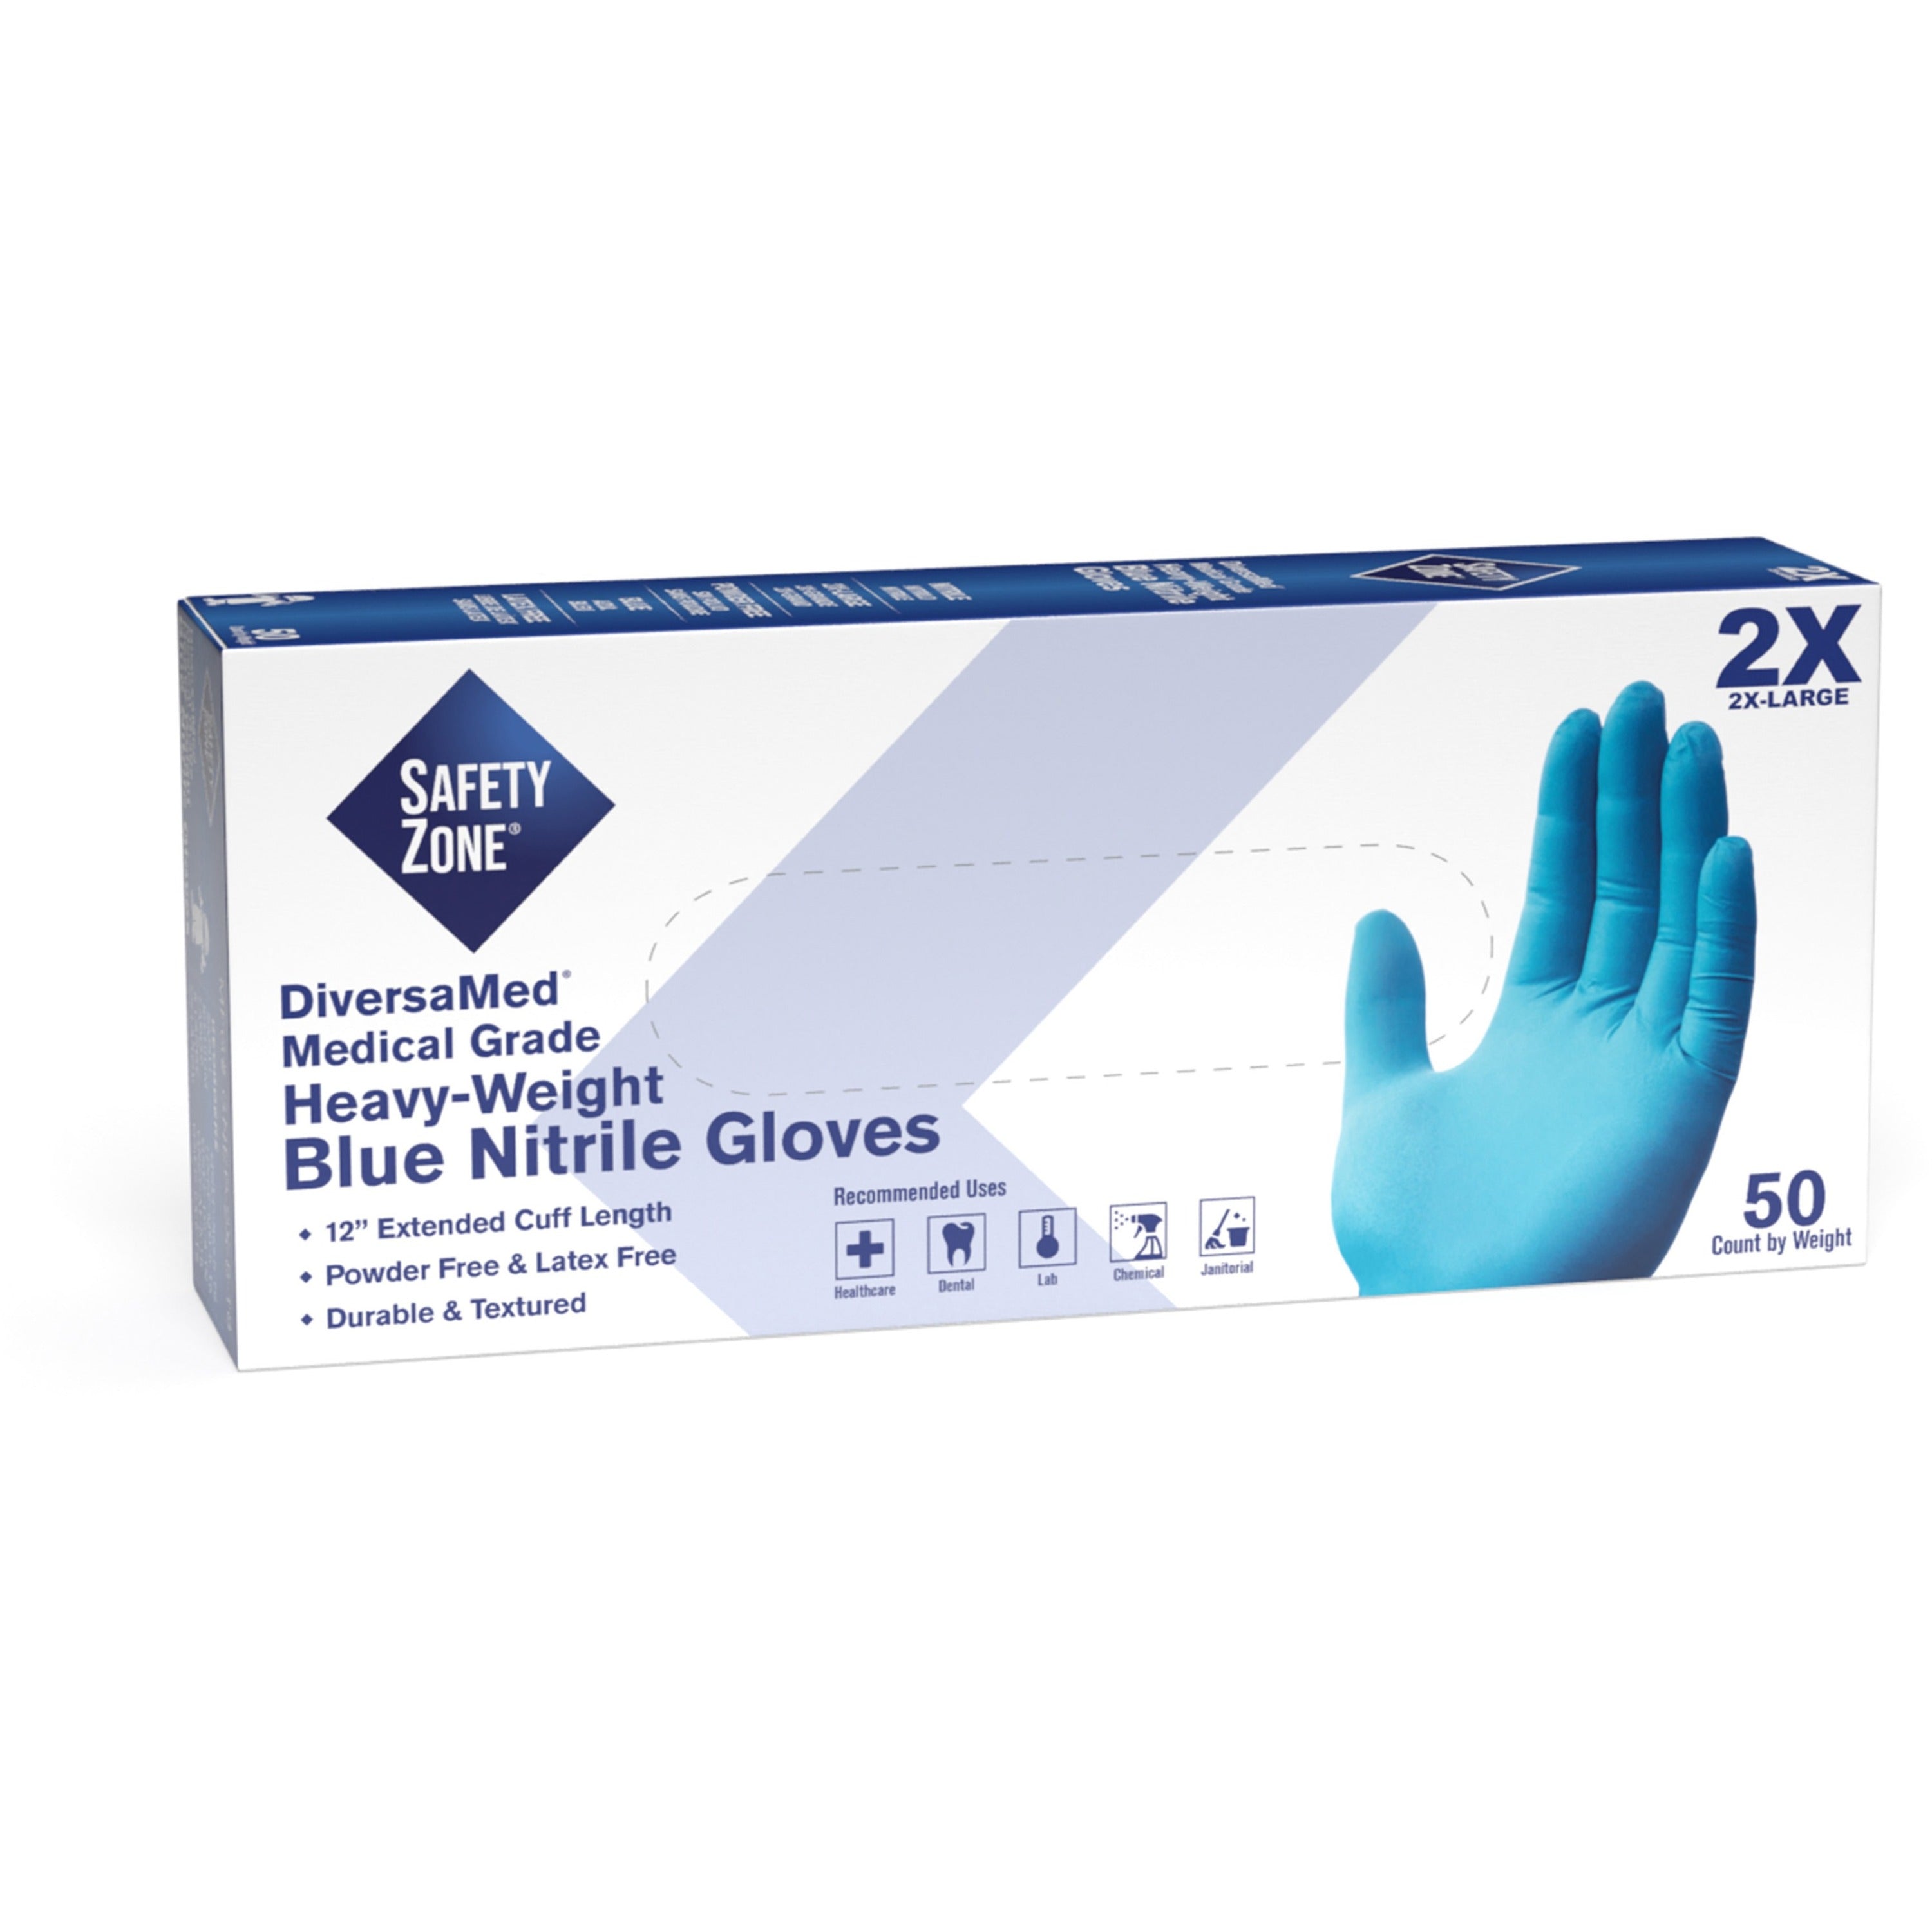 Safety Zone 12" Powder Free Blue Nitrile Gloves - XXL Size - Blue - Comfortable, Allergen-free, Silicone-free, Latex-free, Textured, DEHP-free - For Cleaning, Dishwashing, Medical, Food, Janitorial Use, Painting, Pet Care - 8 mil Thickness - 12" Glov